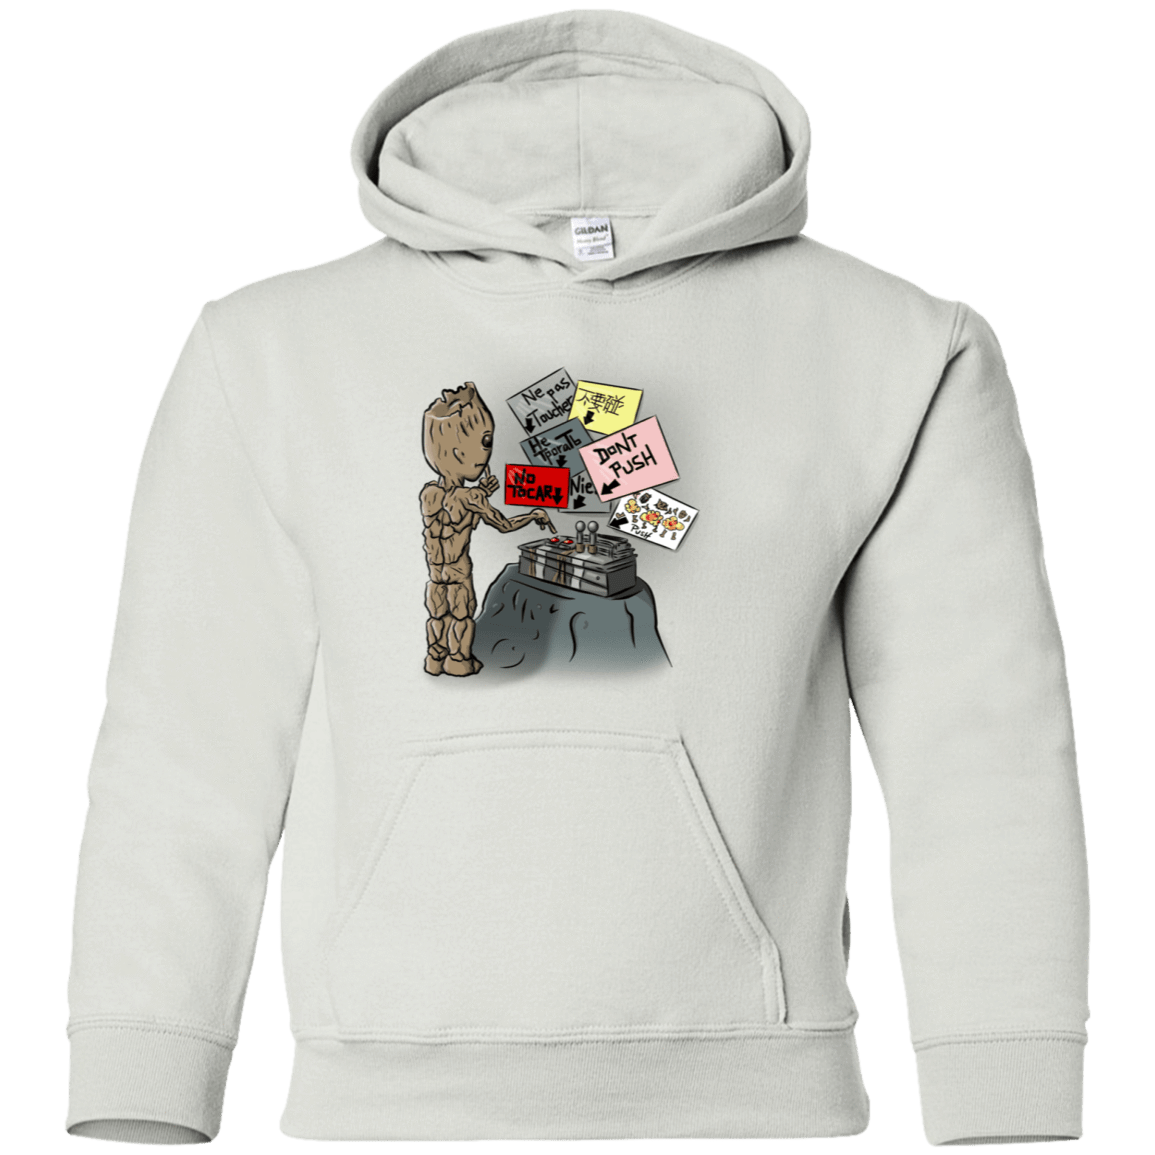 Sweatshirts White / YS Groot No Touch Youth Hoodie